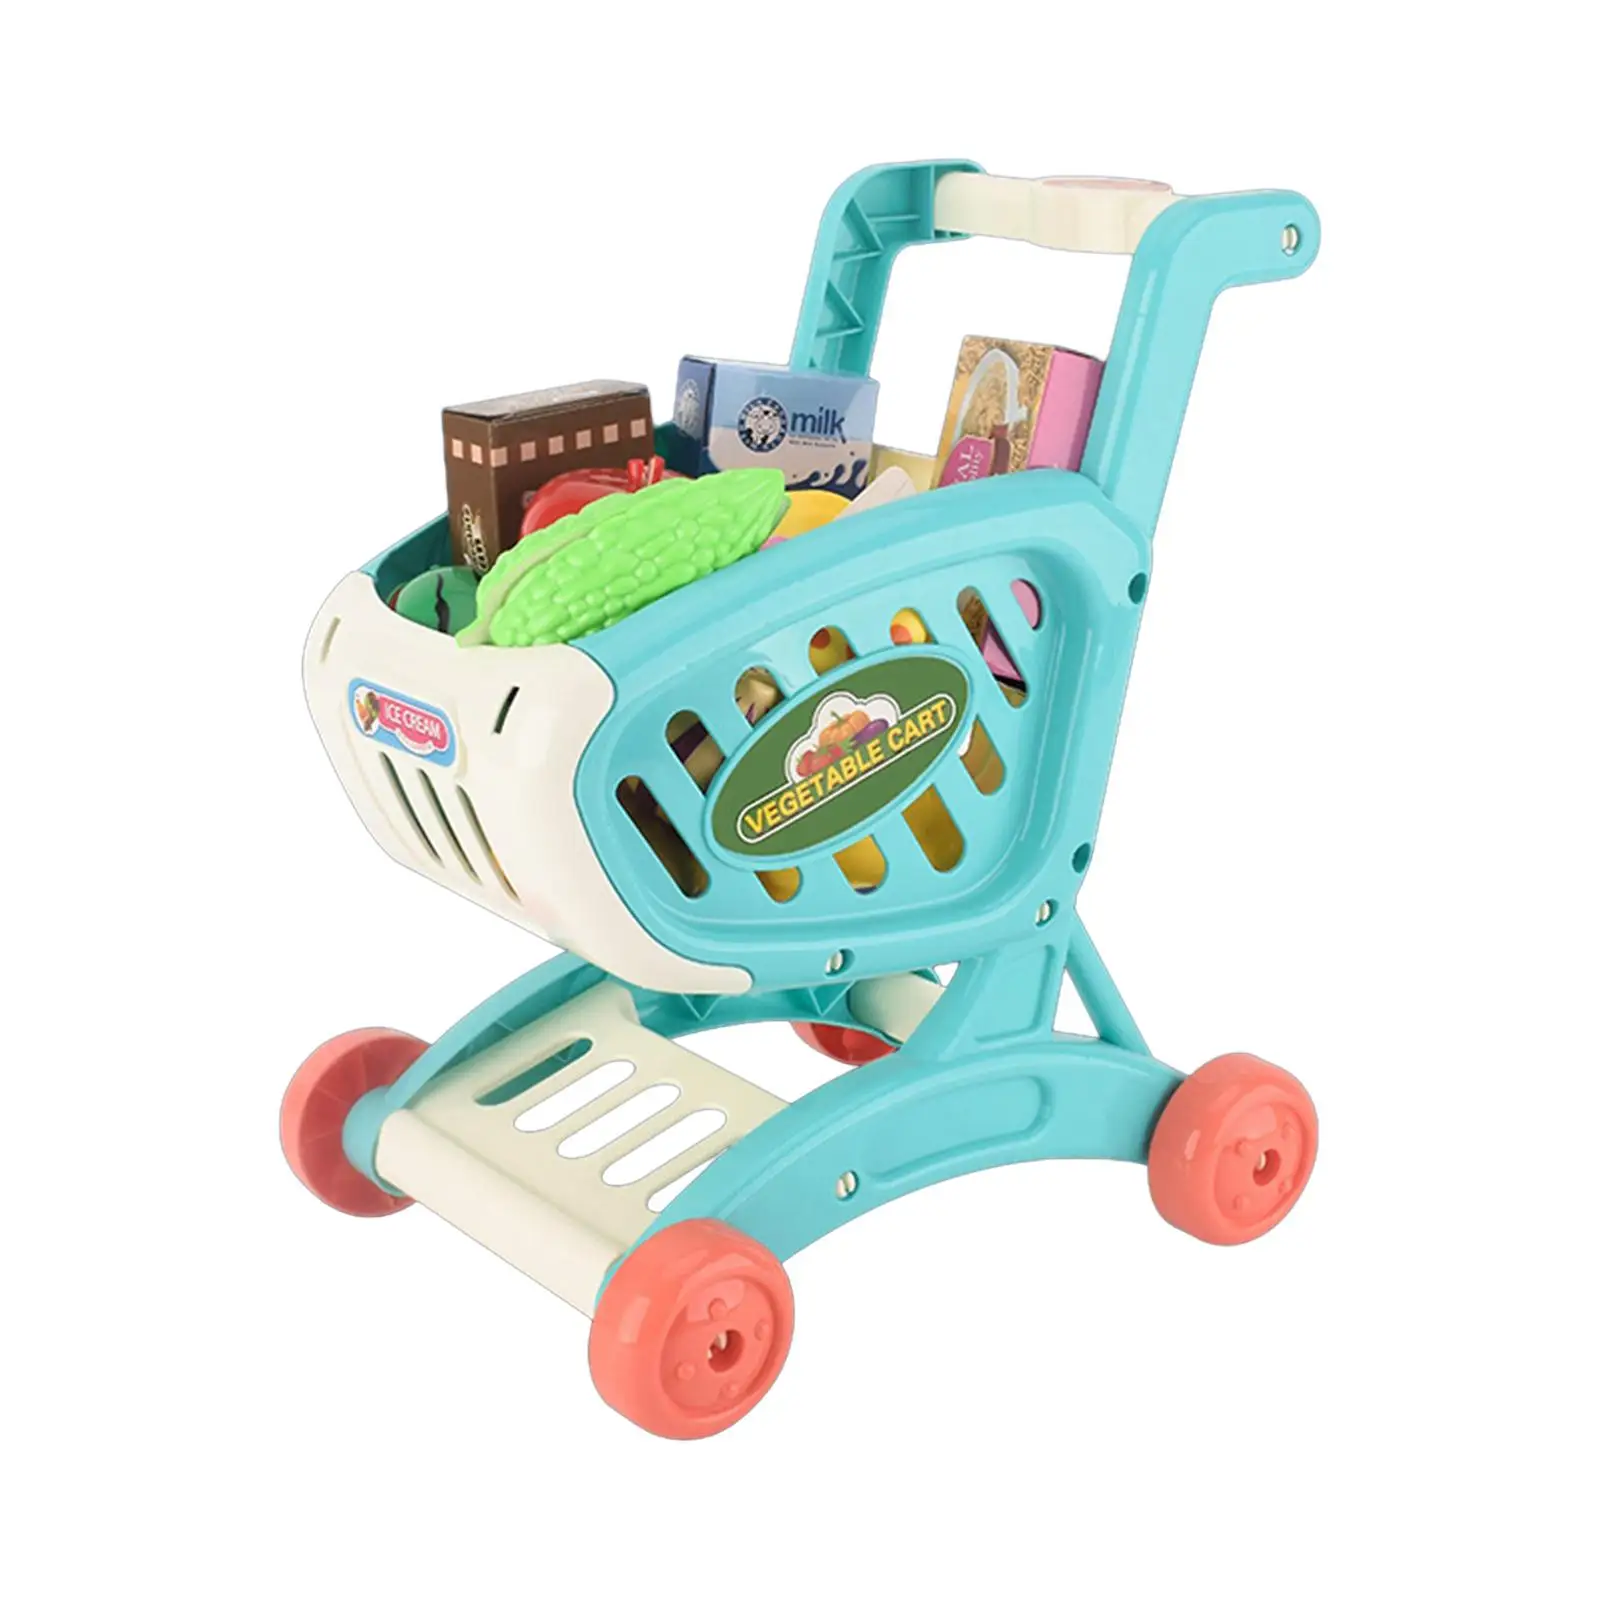 Kids Shopping Cart Toy Supermarket Handcart Toy for Preschool Creative Toys